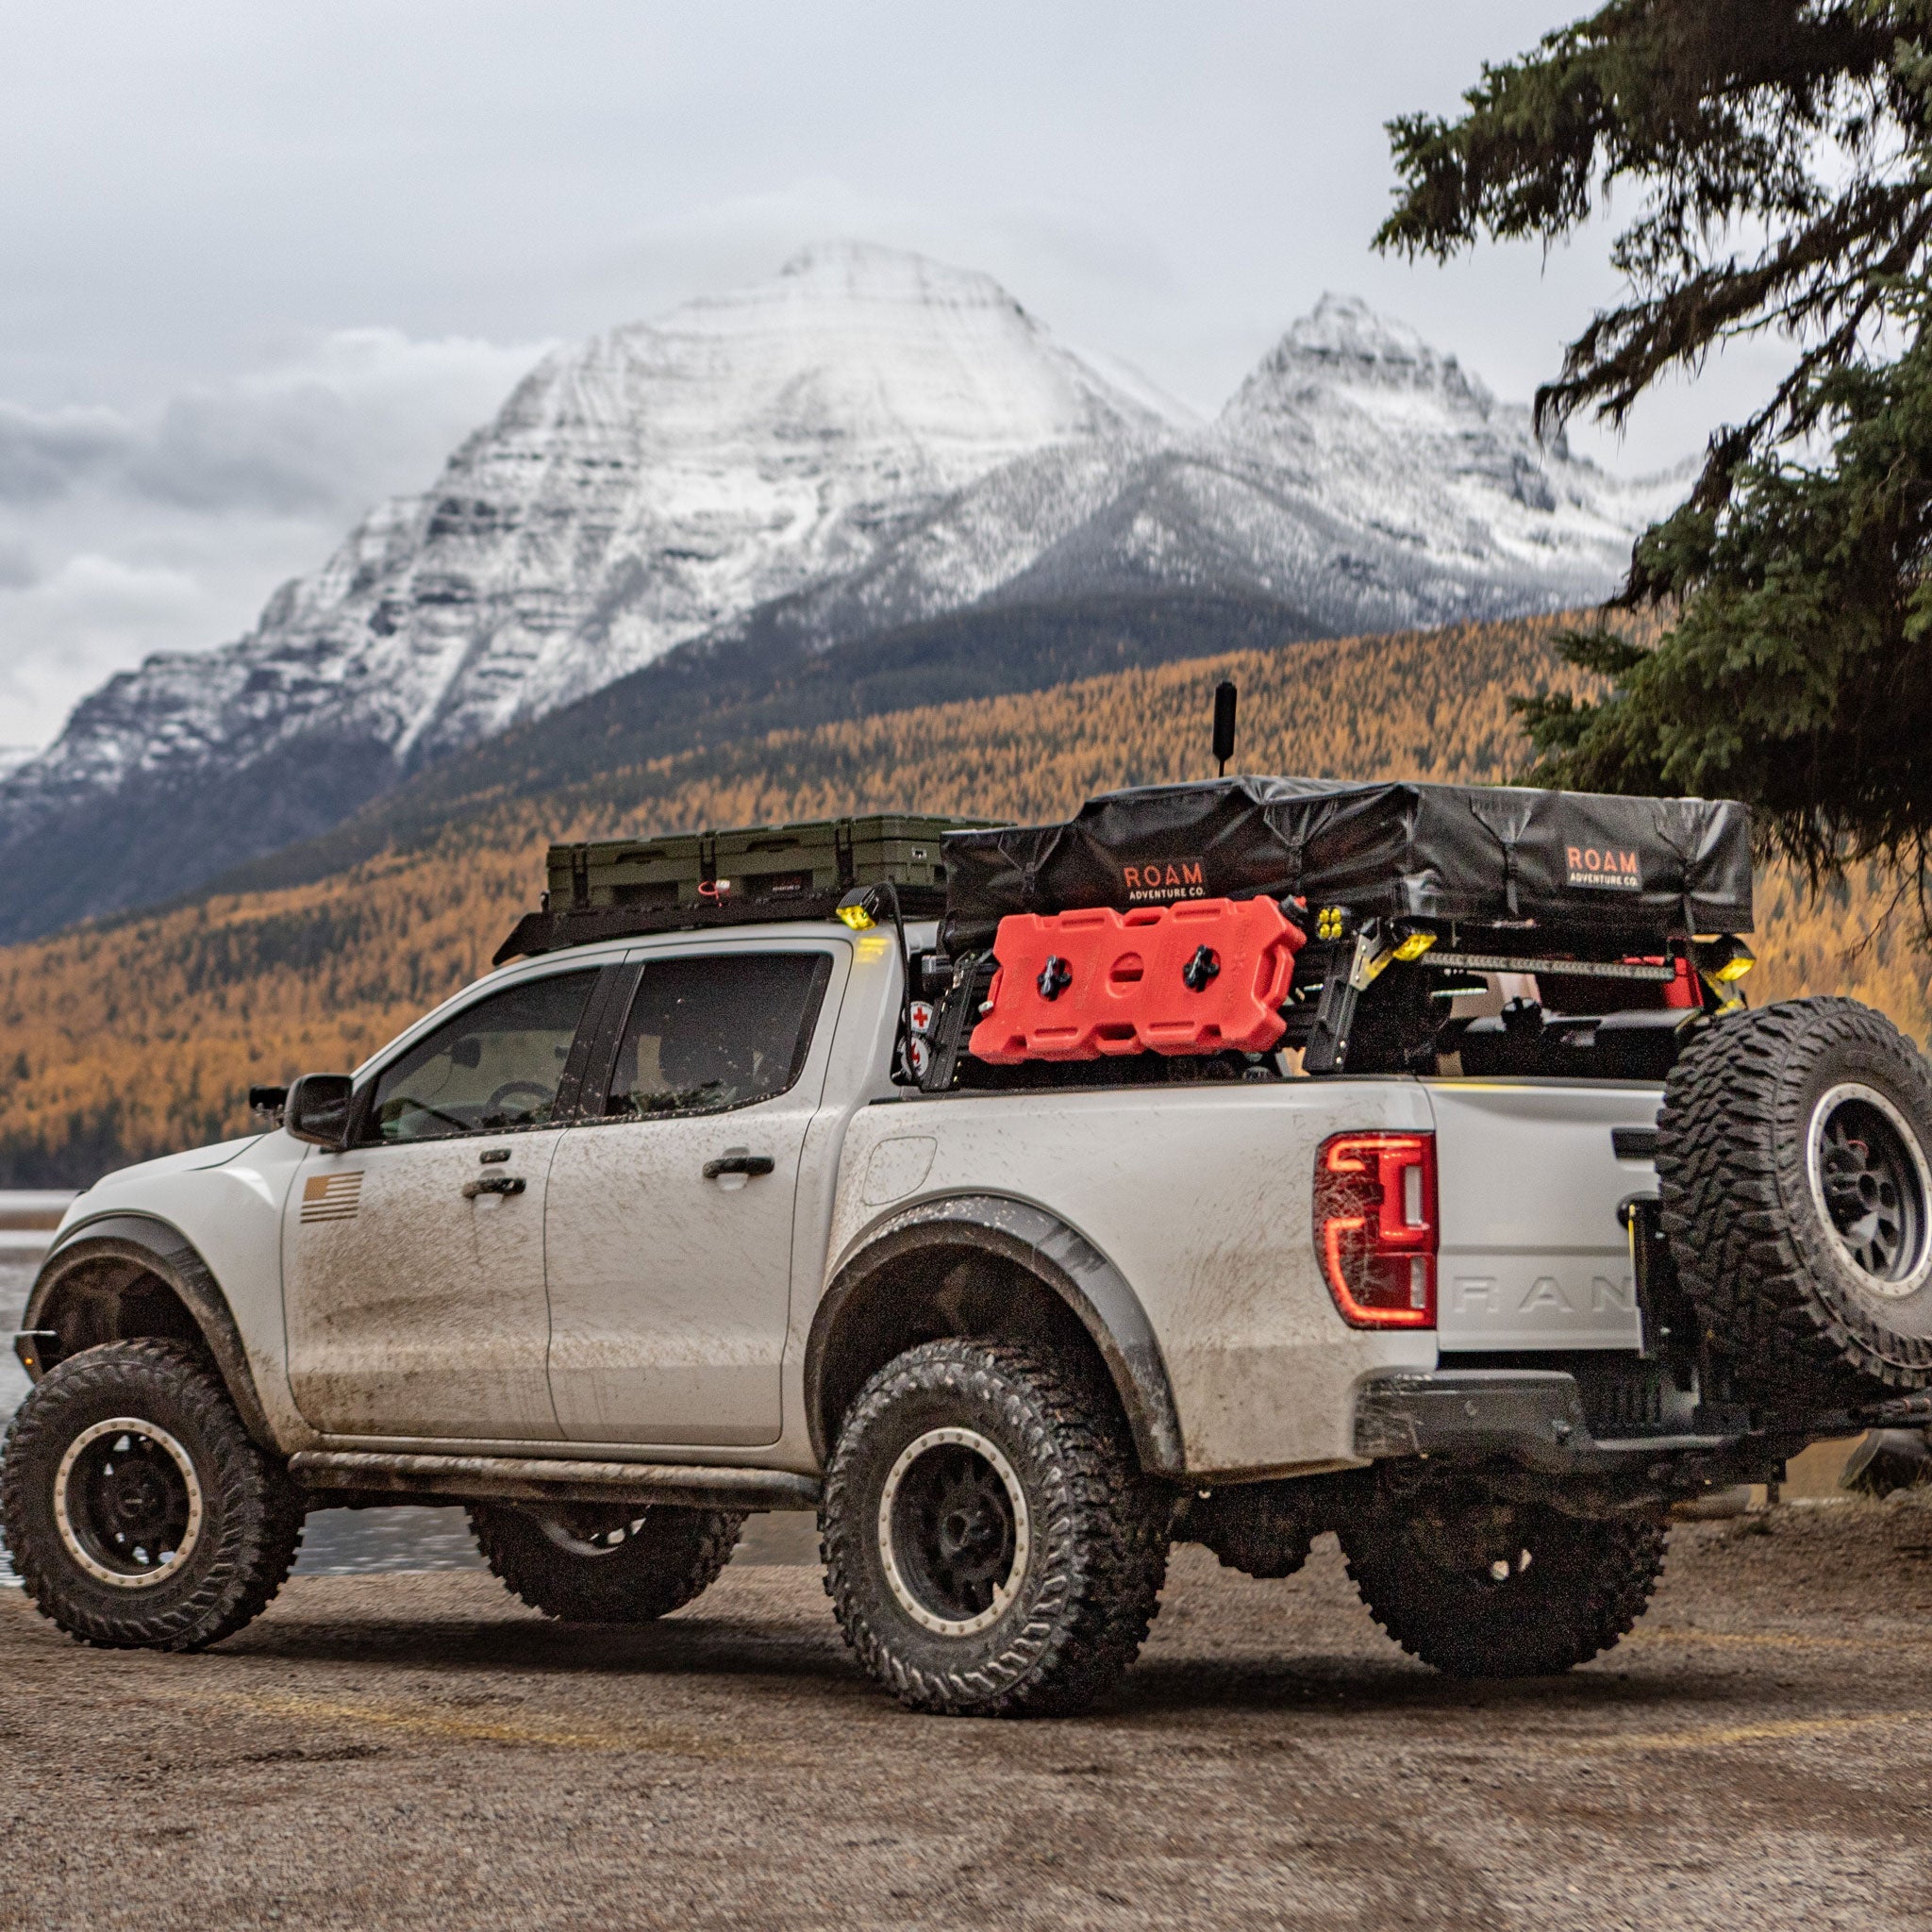 Ford Ranger with xtrusion bed rack Roof top tent, off-road lights, Rotopax, and overlanding gear.